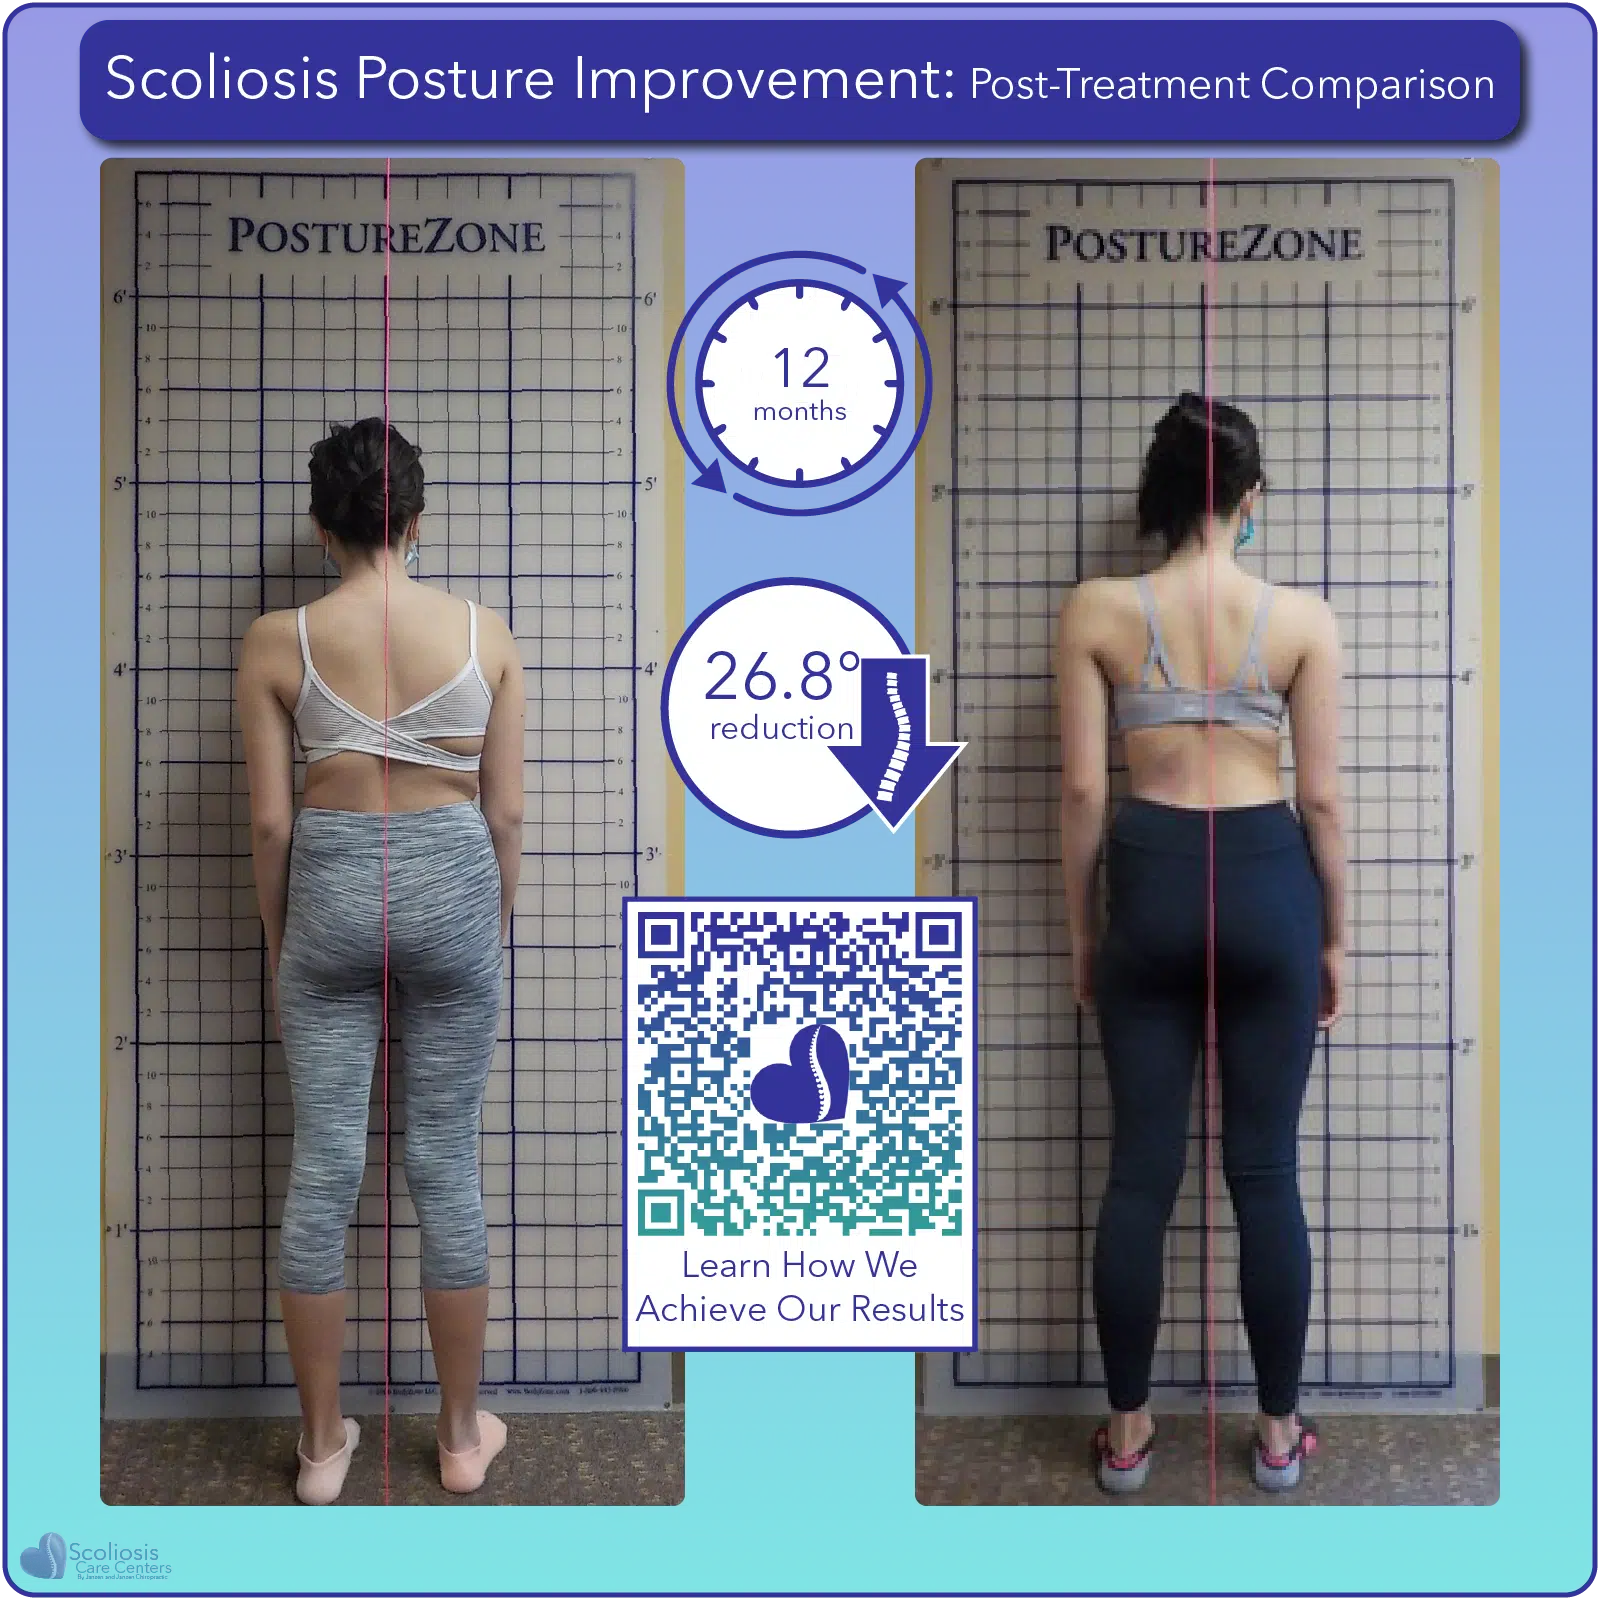 Scoliosis postural improvement with 26.8 degree curve reduction over 12 months of treatment